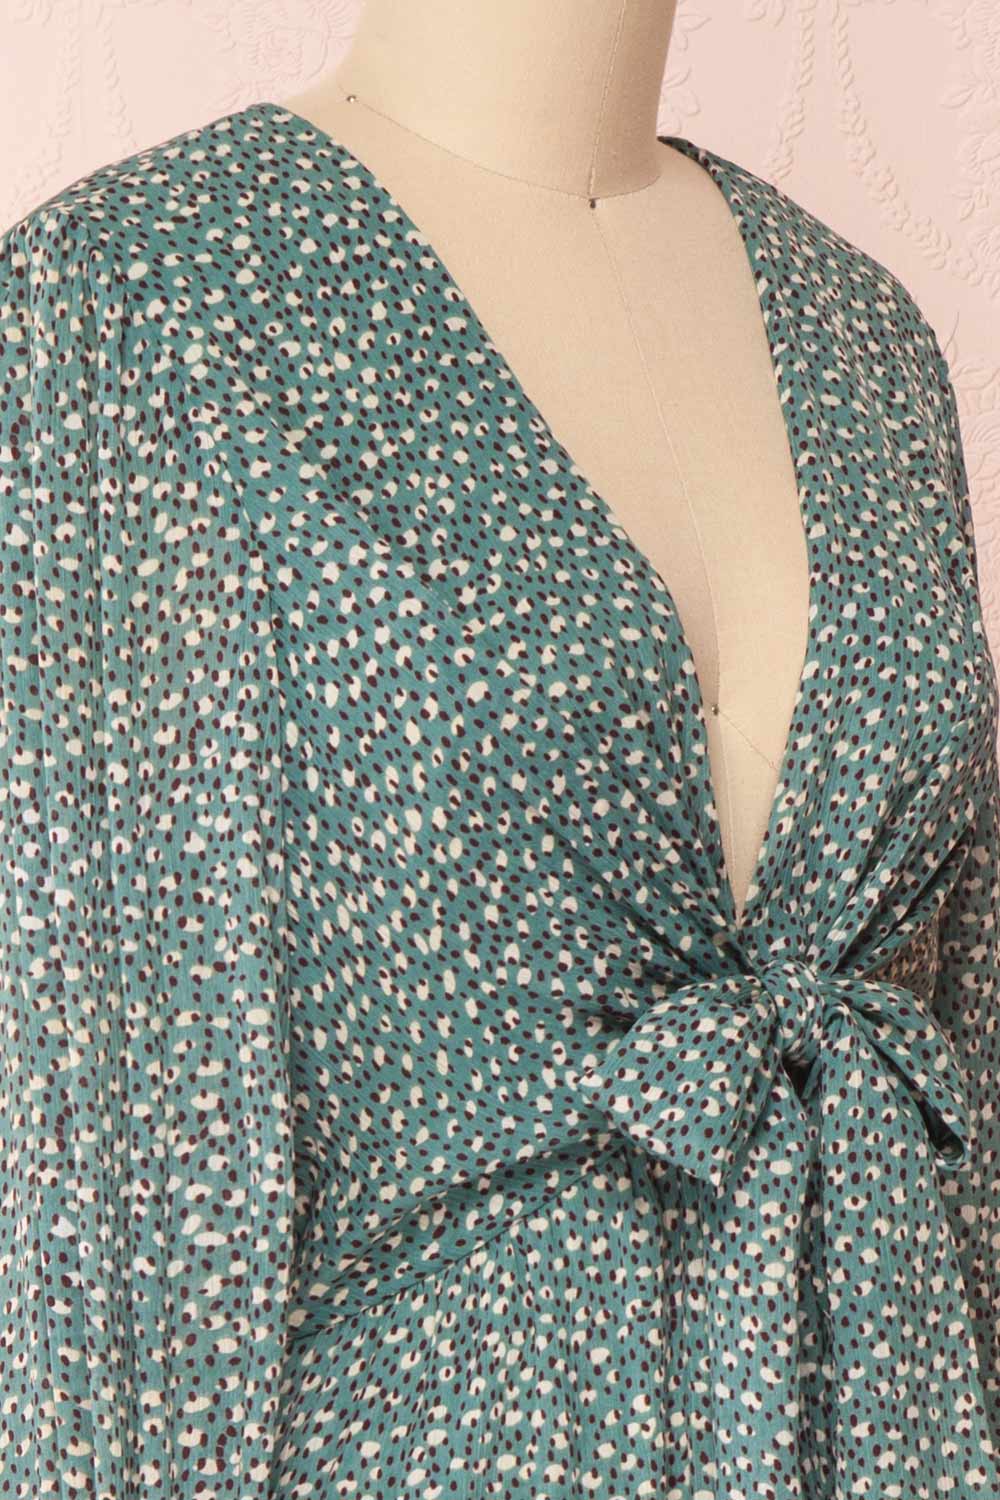 Guada Turquoise Teal Patterned Long Sleeved Dress | Boutique 1861 side close-up